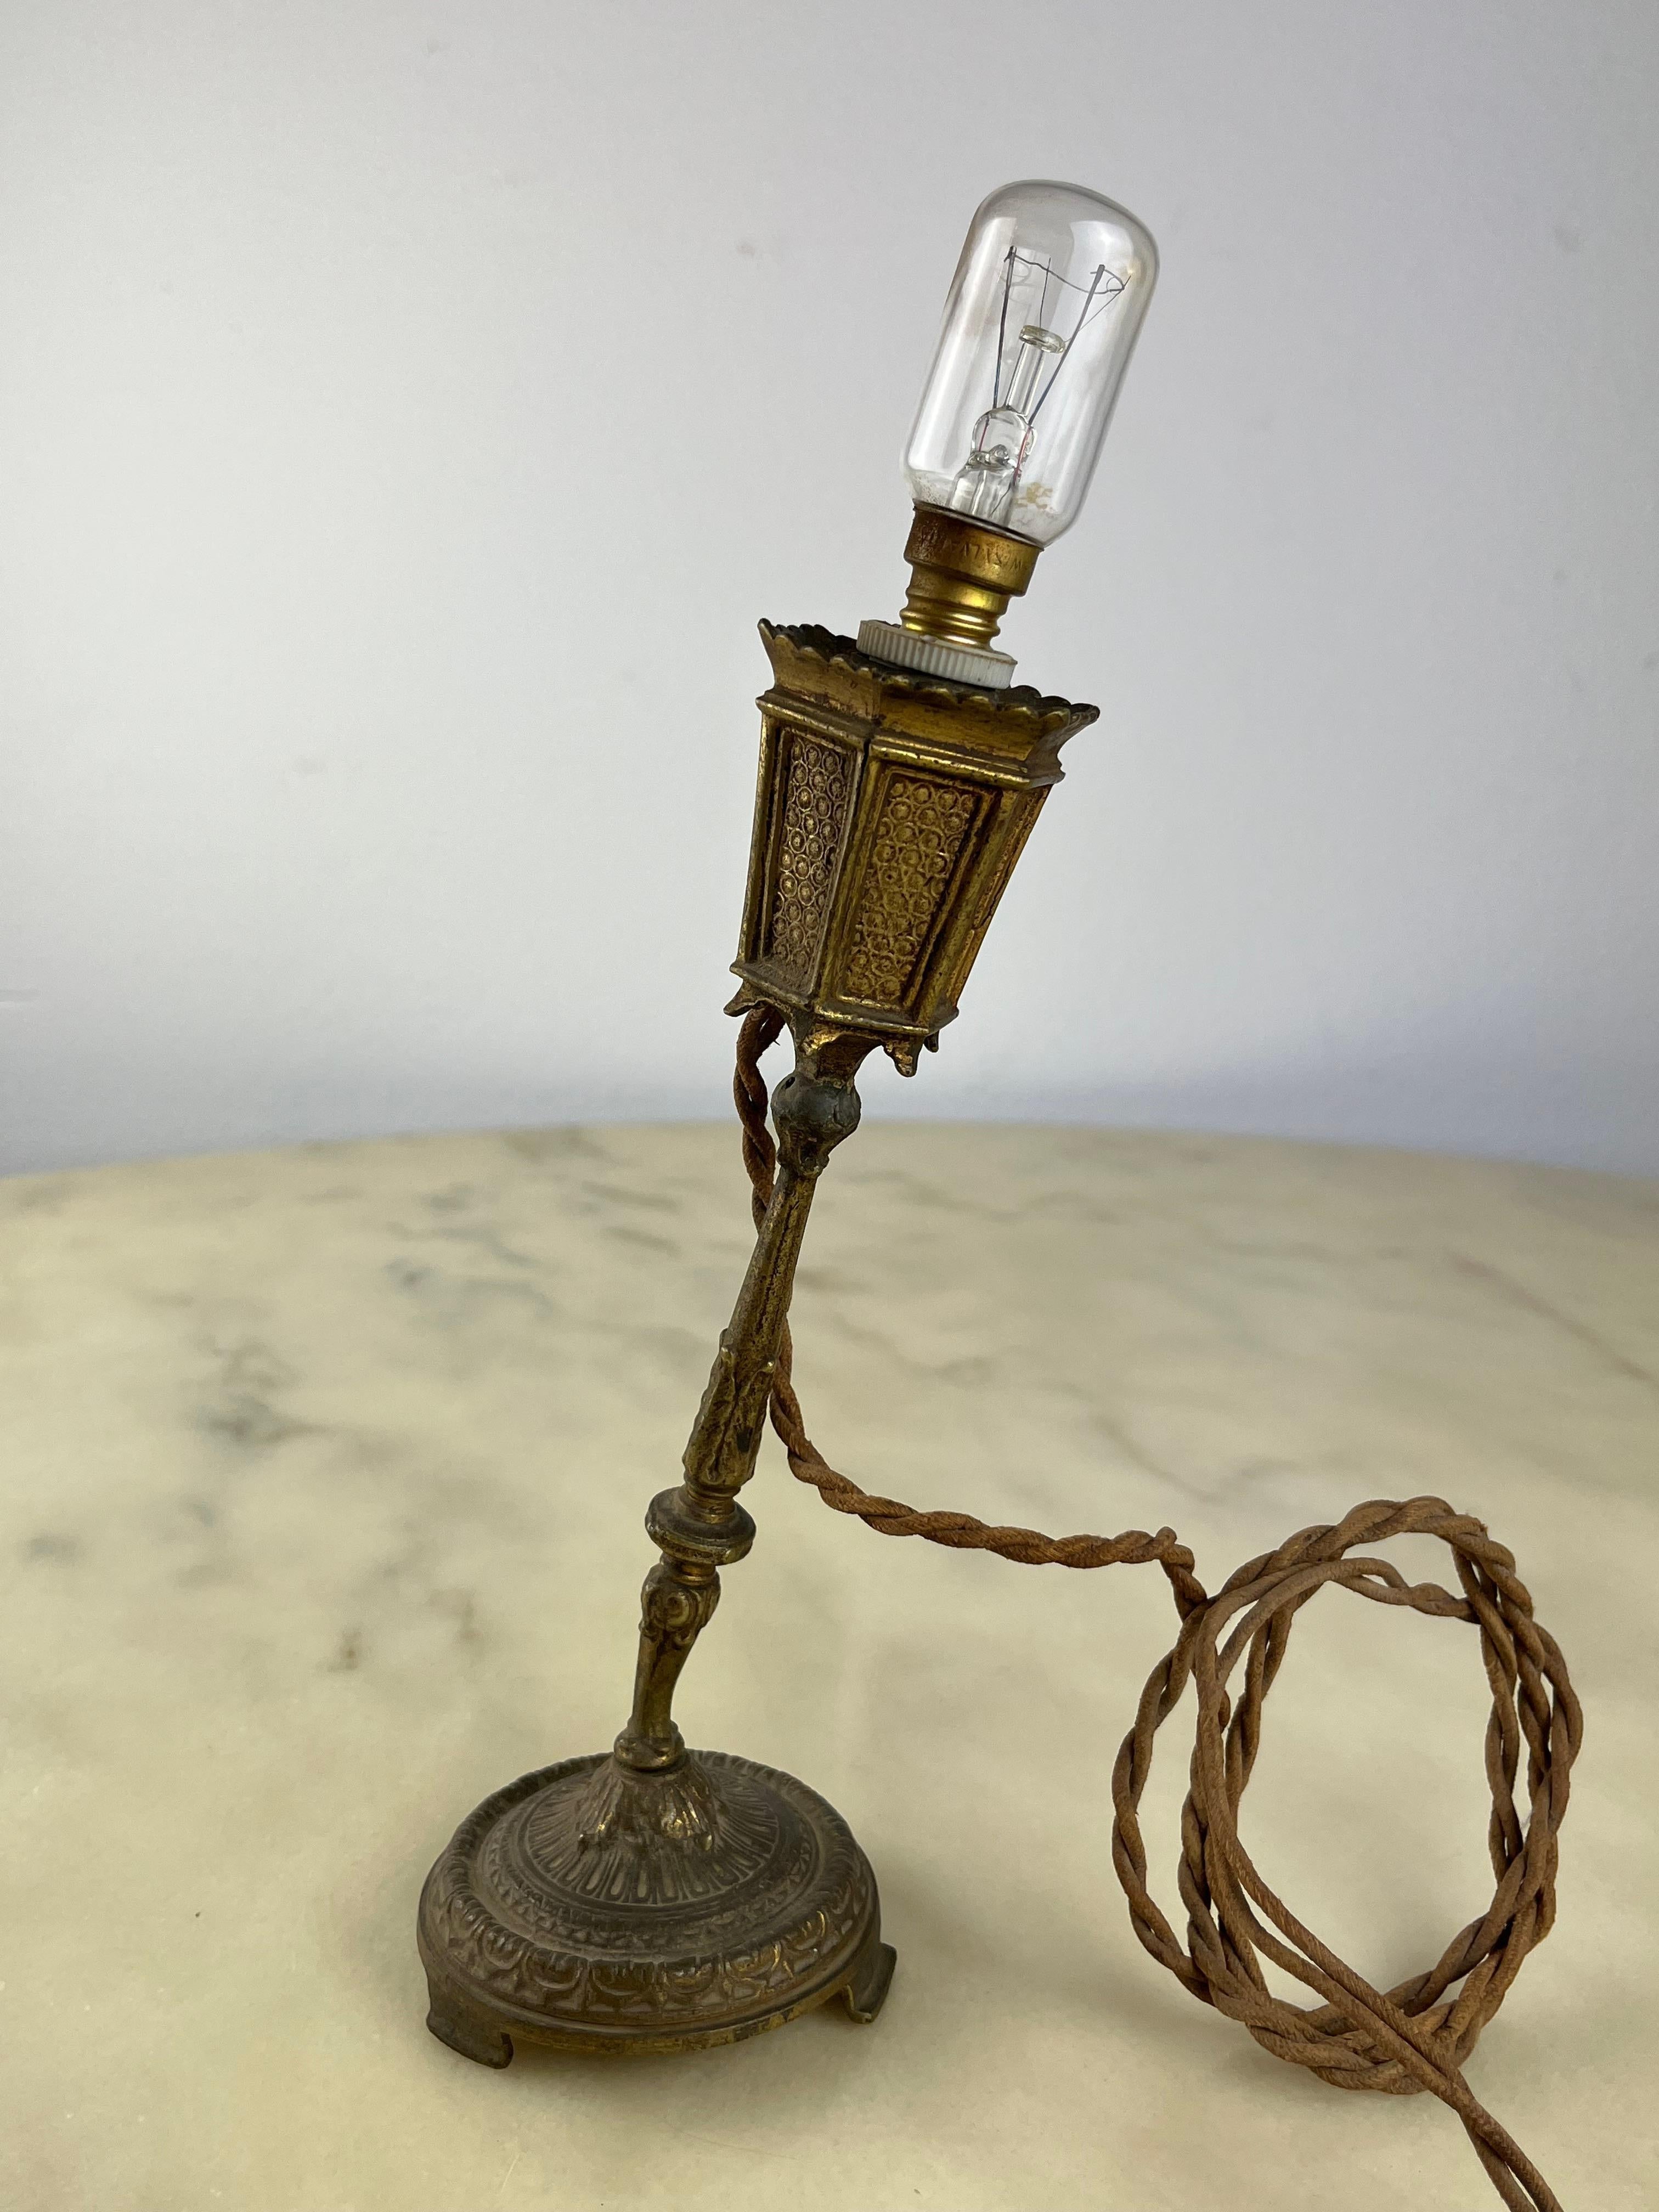 Bronze bedside lamp, Italy, 1940s.
In working order, found in a noble apartment. Small signs of age and use.